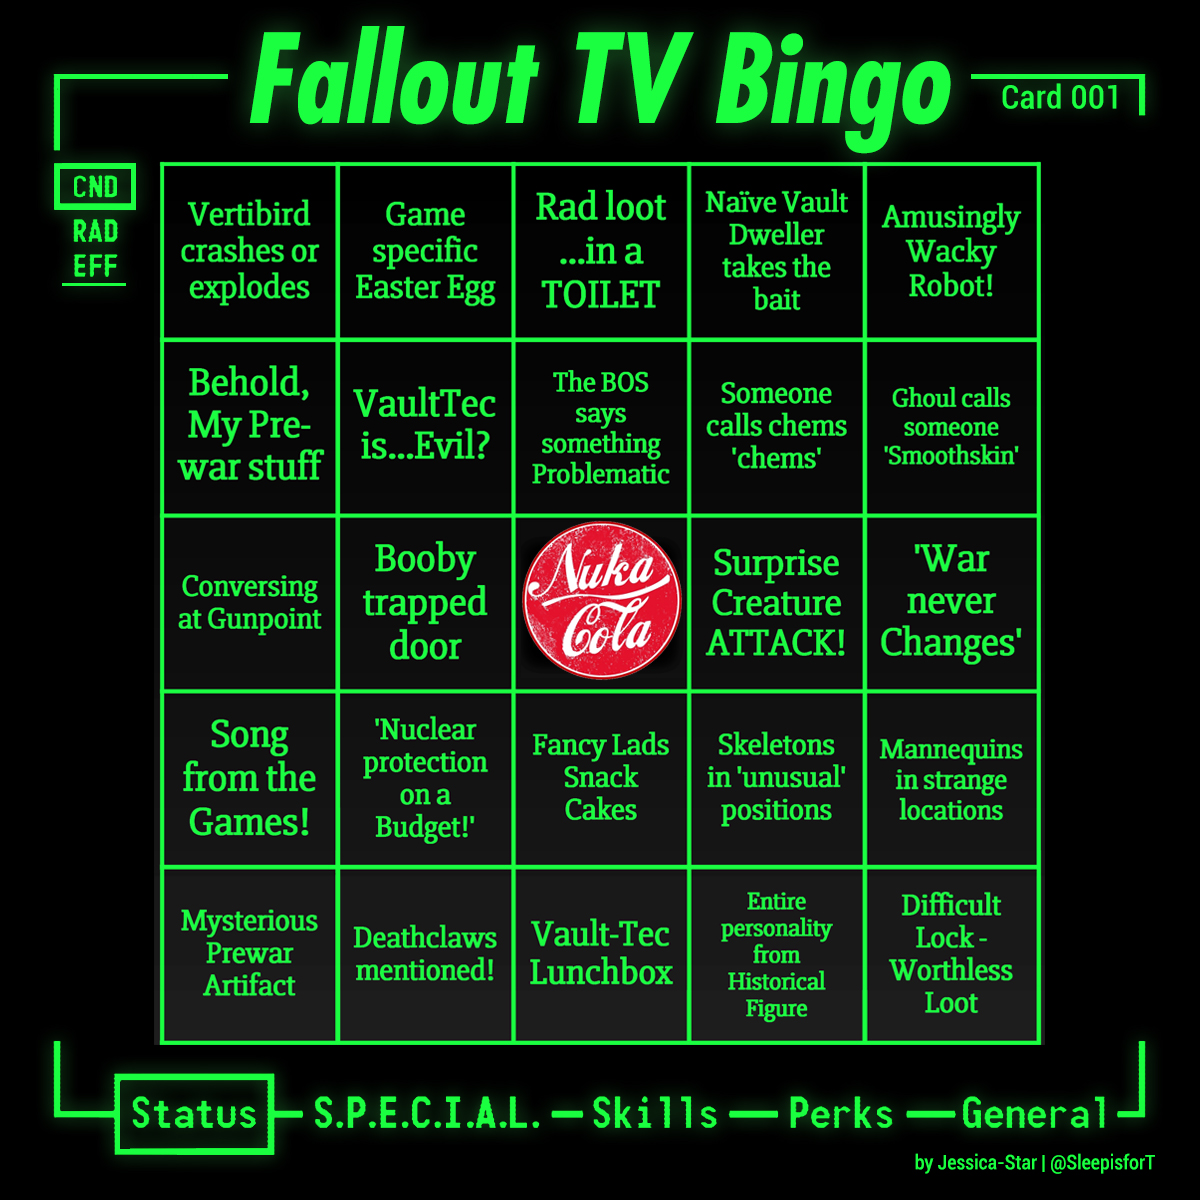 Fallout TV Bingo--Spoiler free! I've made a set of 10 Bingo cards for all you cool cats ready for the @falloutonprime release! Full of some of our favourite Fallout cliches & situations Perfect for watch parties or solo play, pick a card & see if you can win! #Fallout 📺☢️